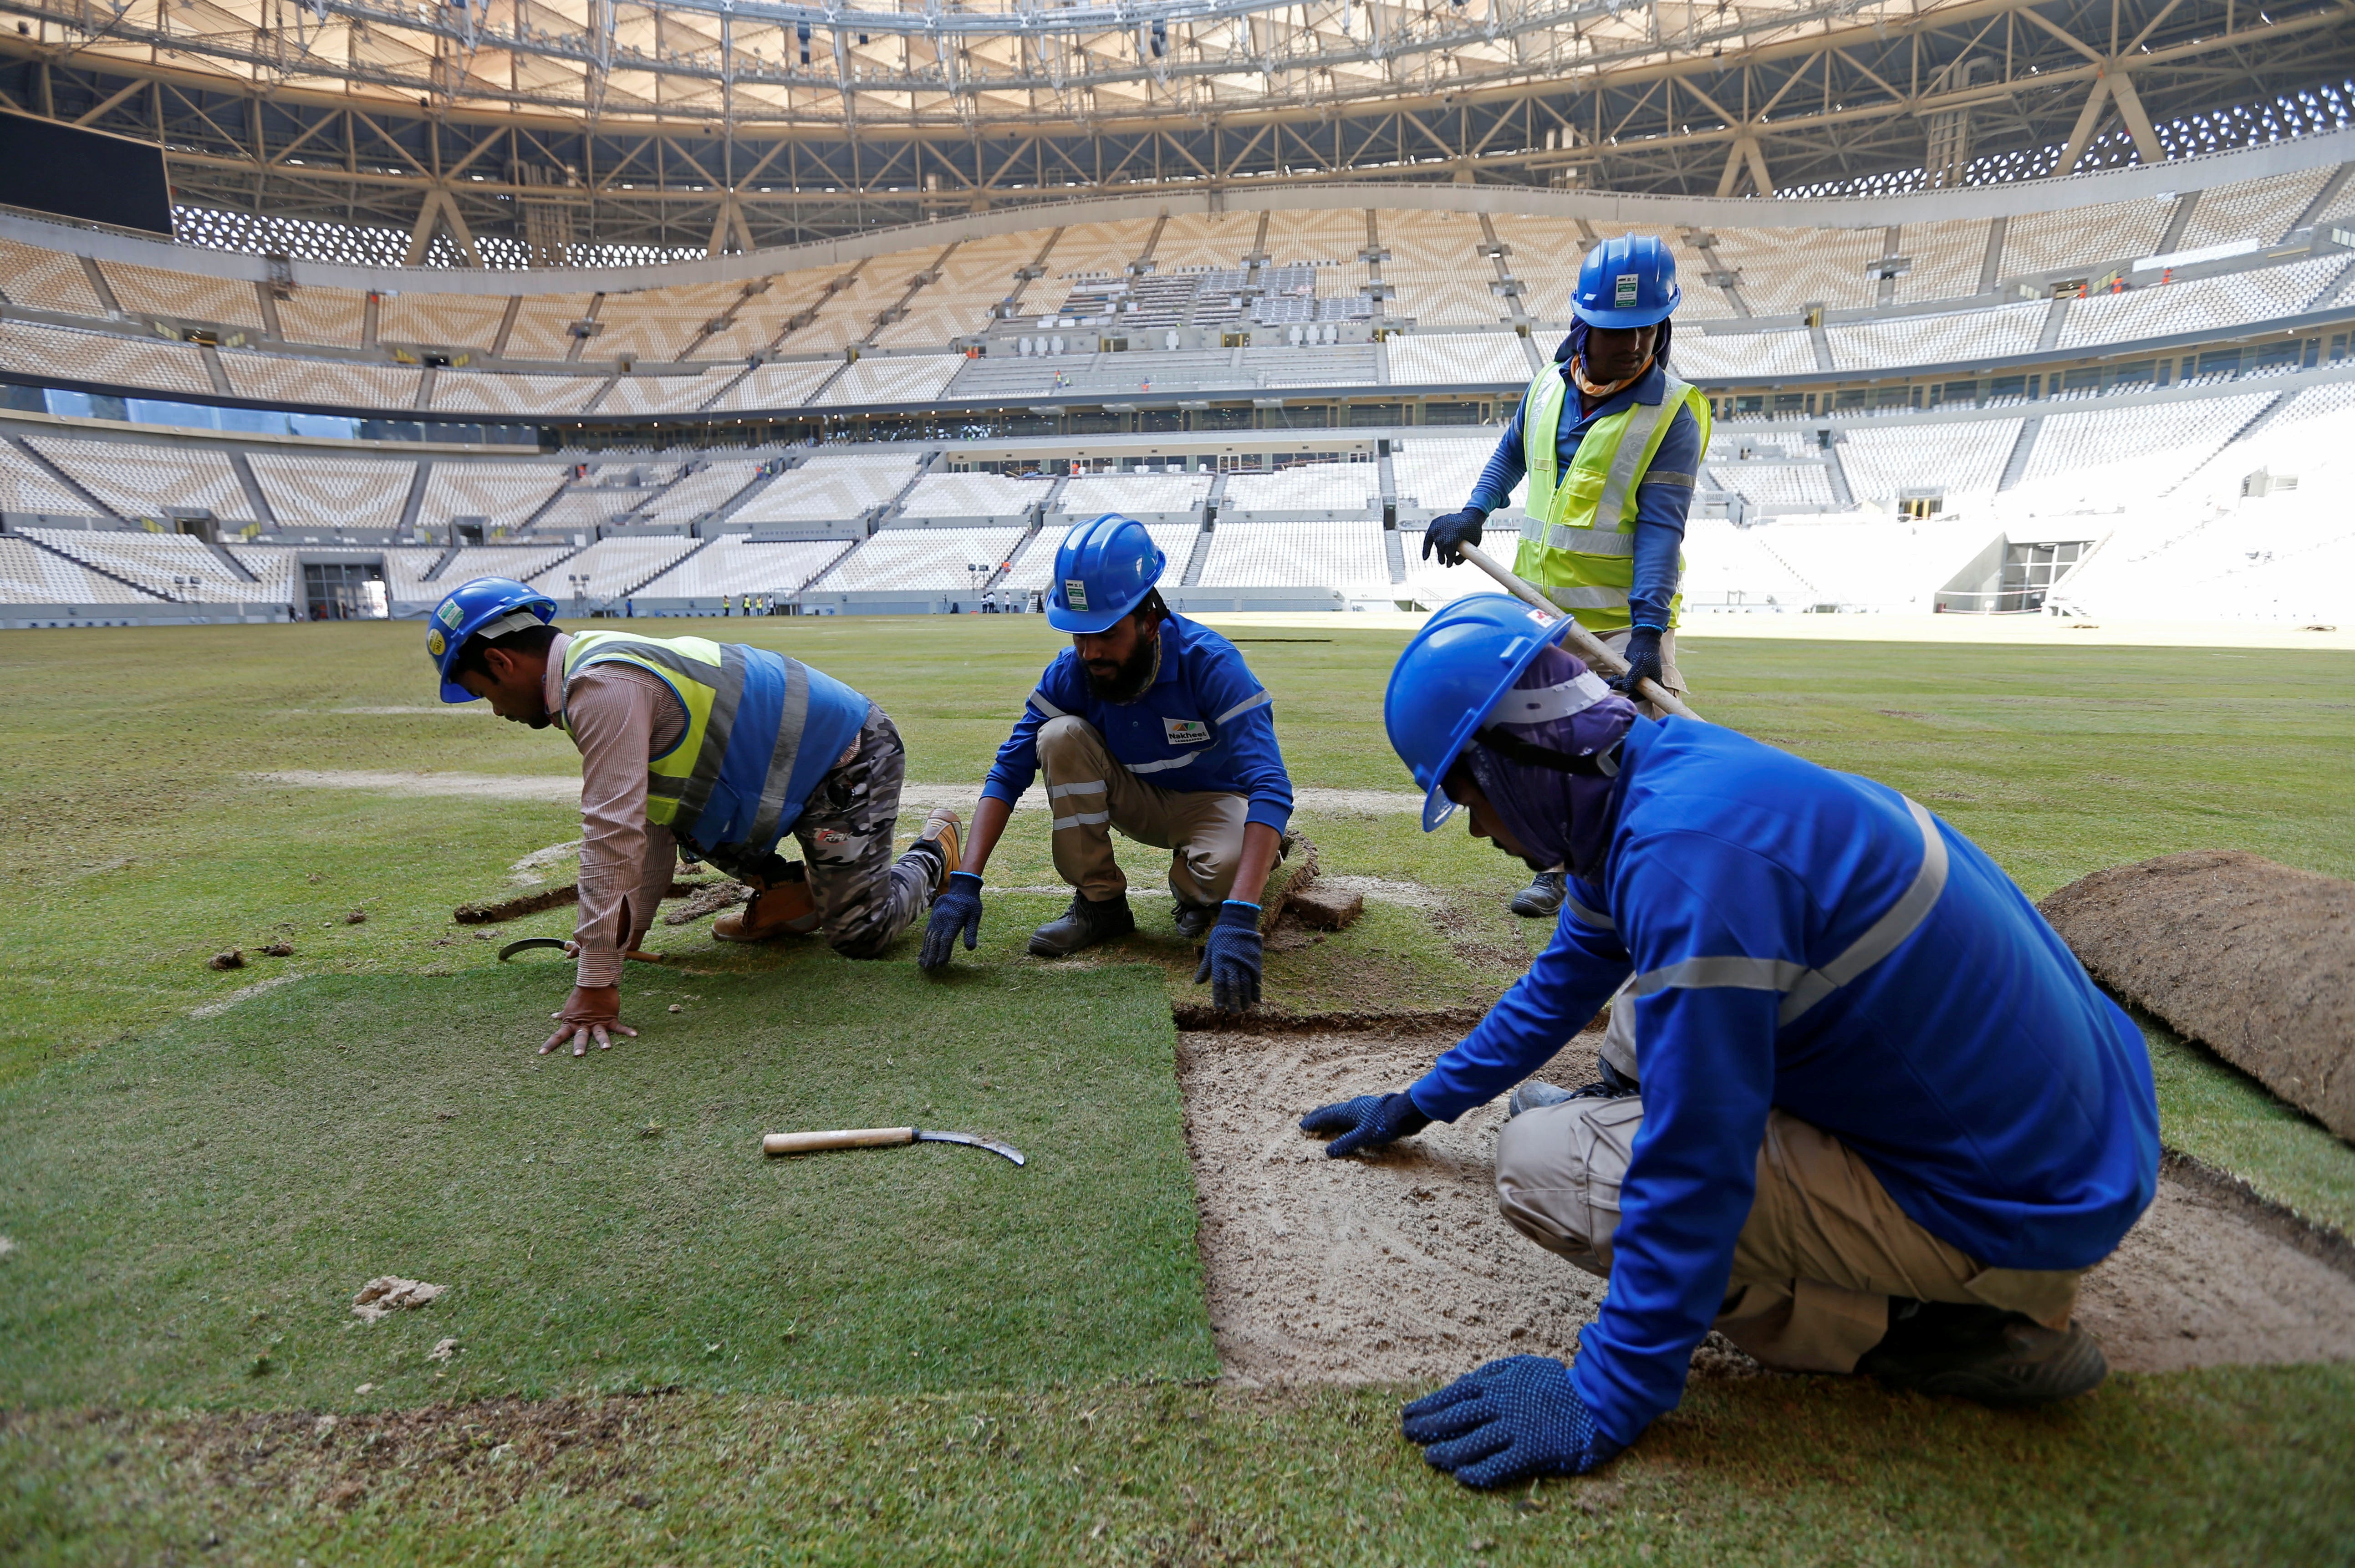 Workers lay turf inside the Lusail Stadium, the venue for the 2022 Qatar World Cup final